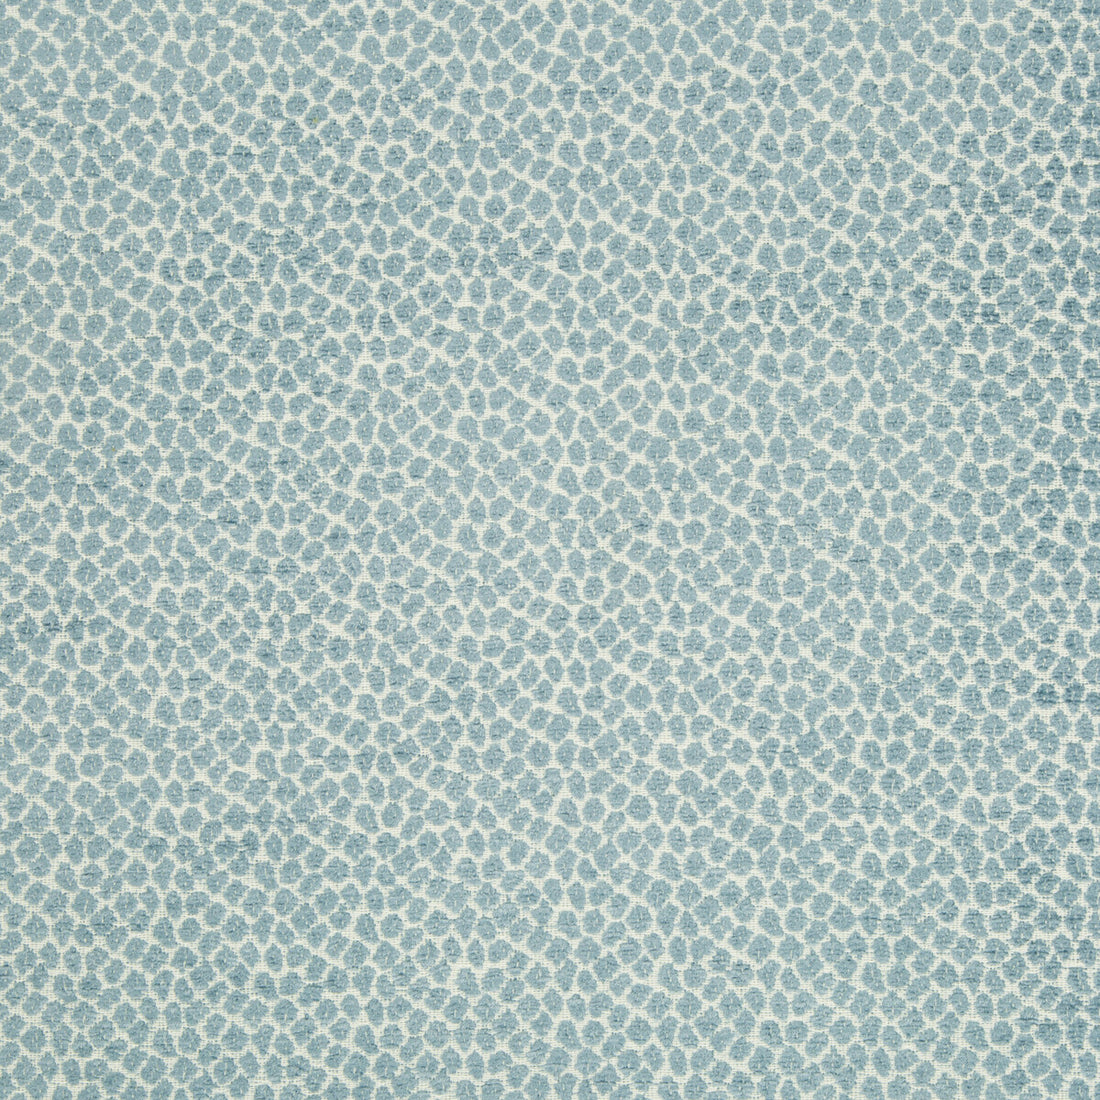 Kravet Design fabric in 34682-52 color - pattern 34682.52.0 - by Kravet Design in the Crypton Home collection